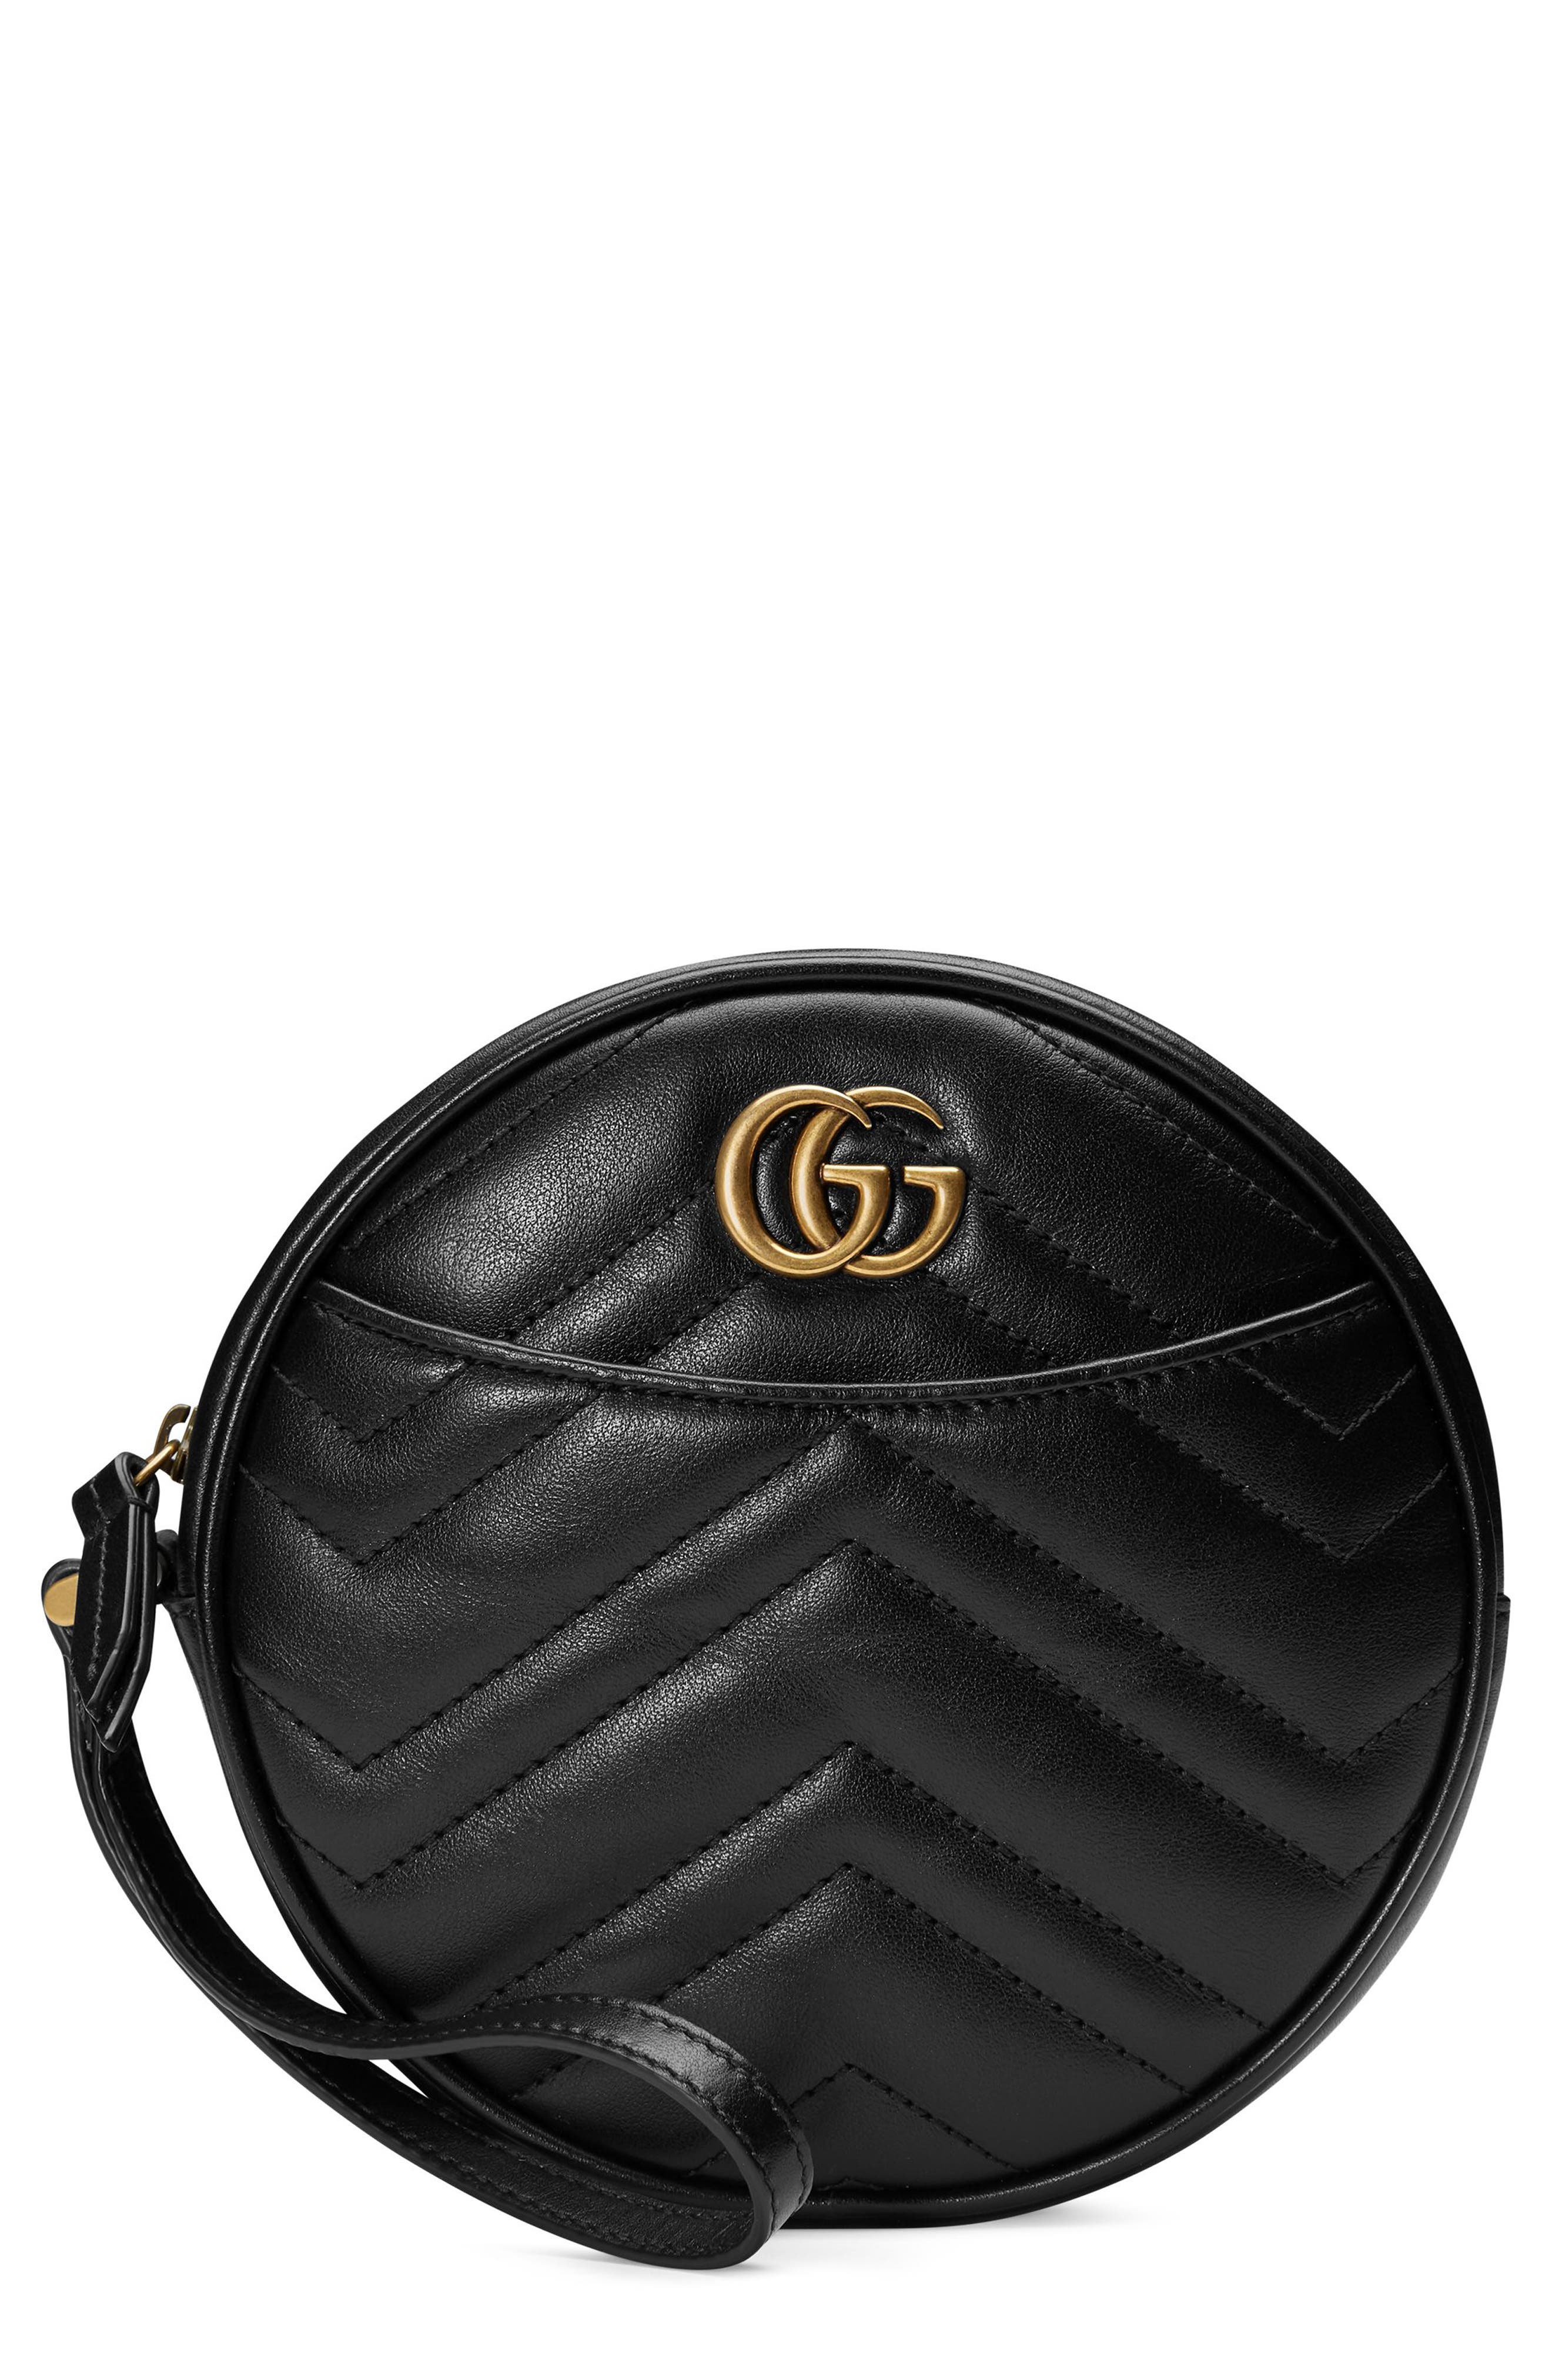 Gucci Leather Wristlet Clutch | Nordstrom